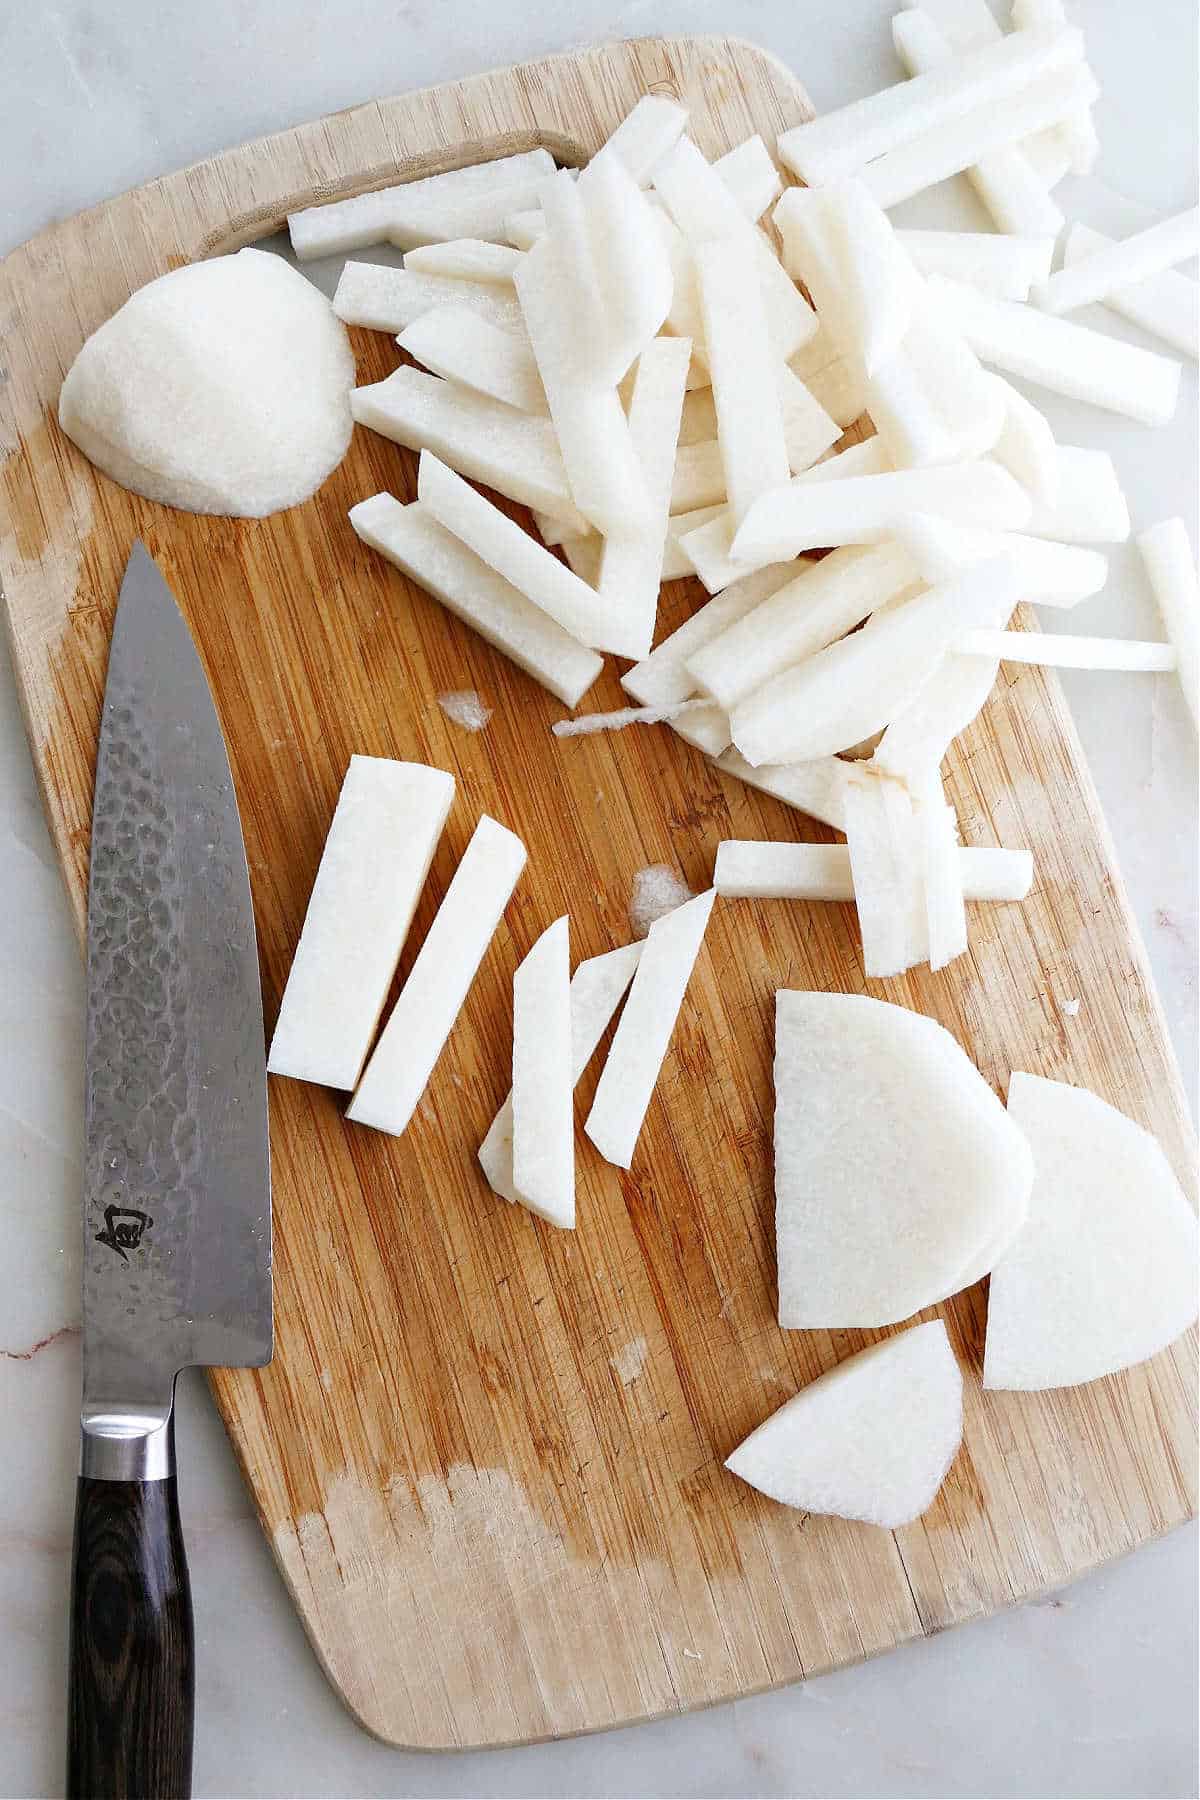 How To Store Jicama Once Cut